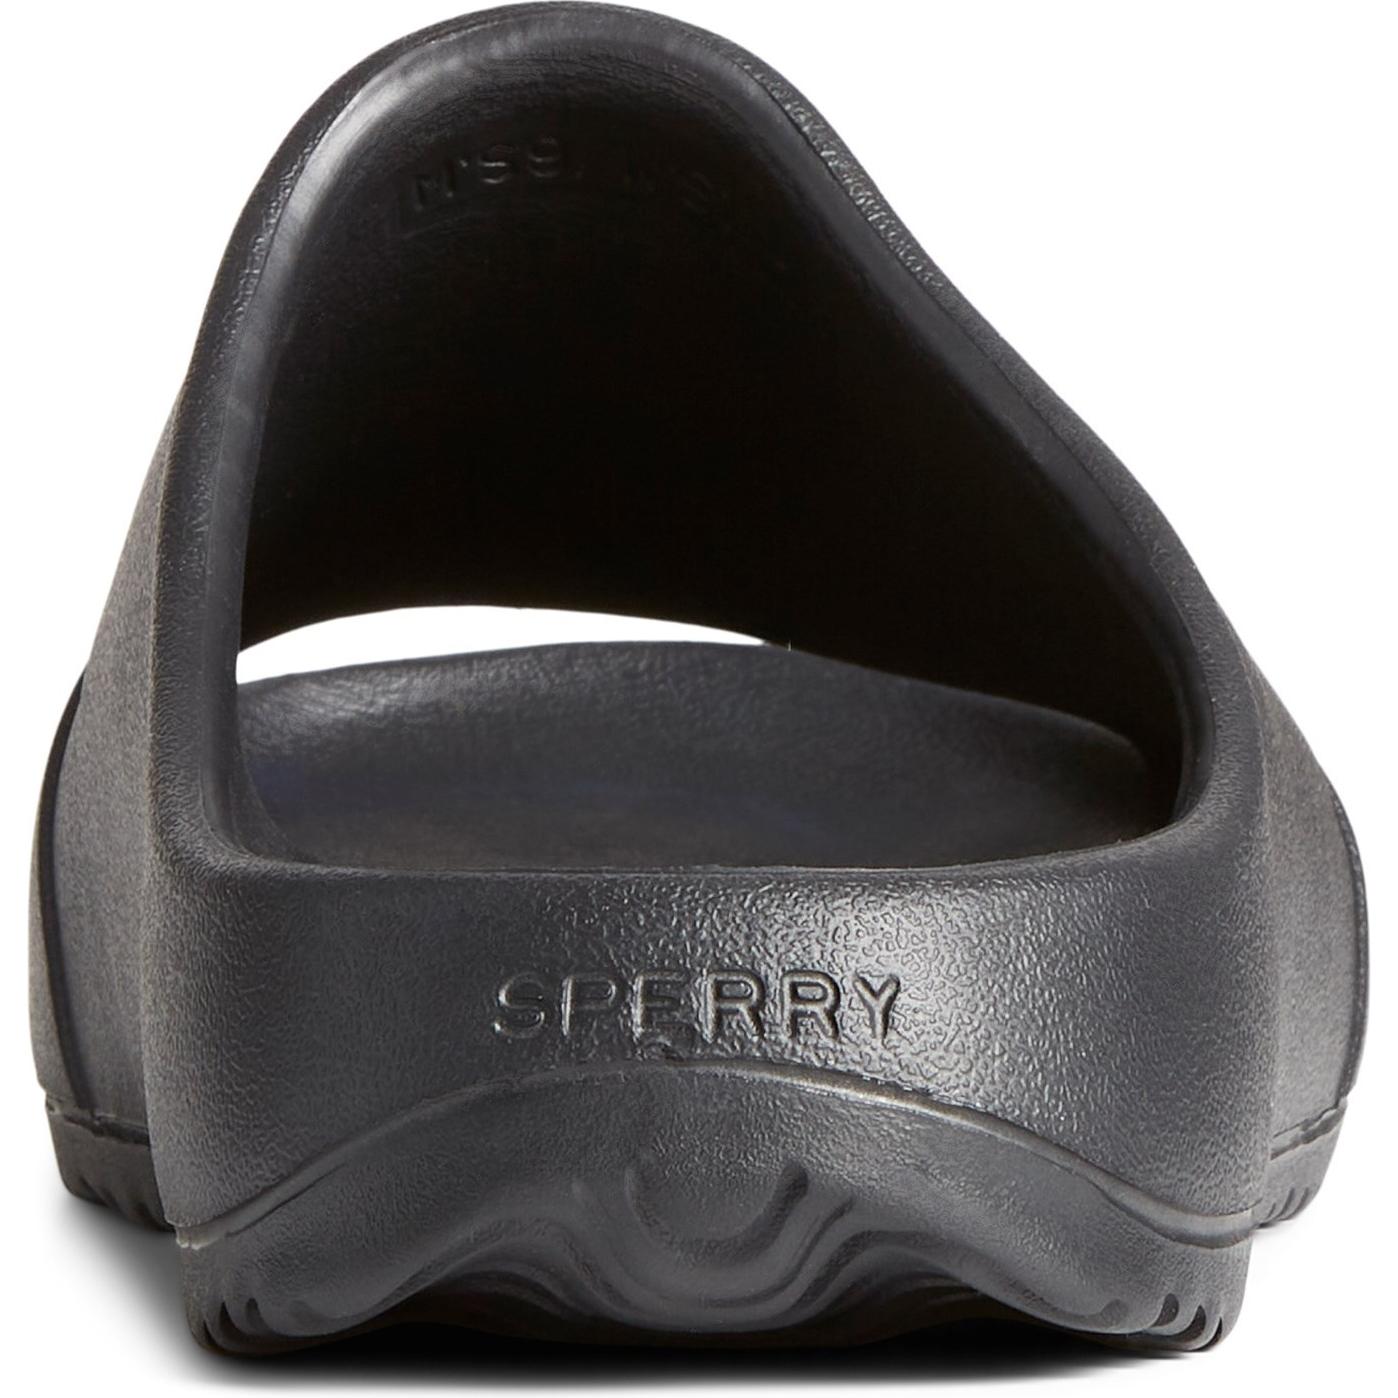 Sperry Top-sider Float Slide Core Shoes